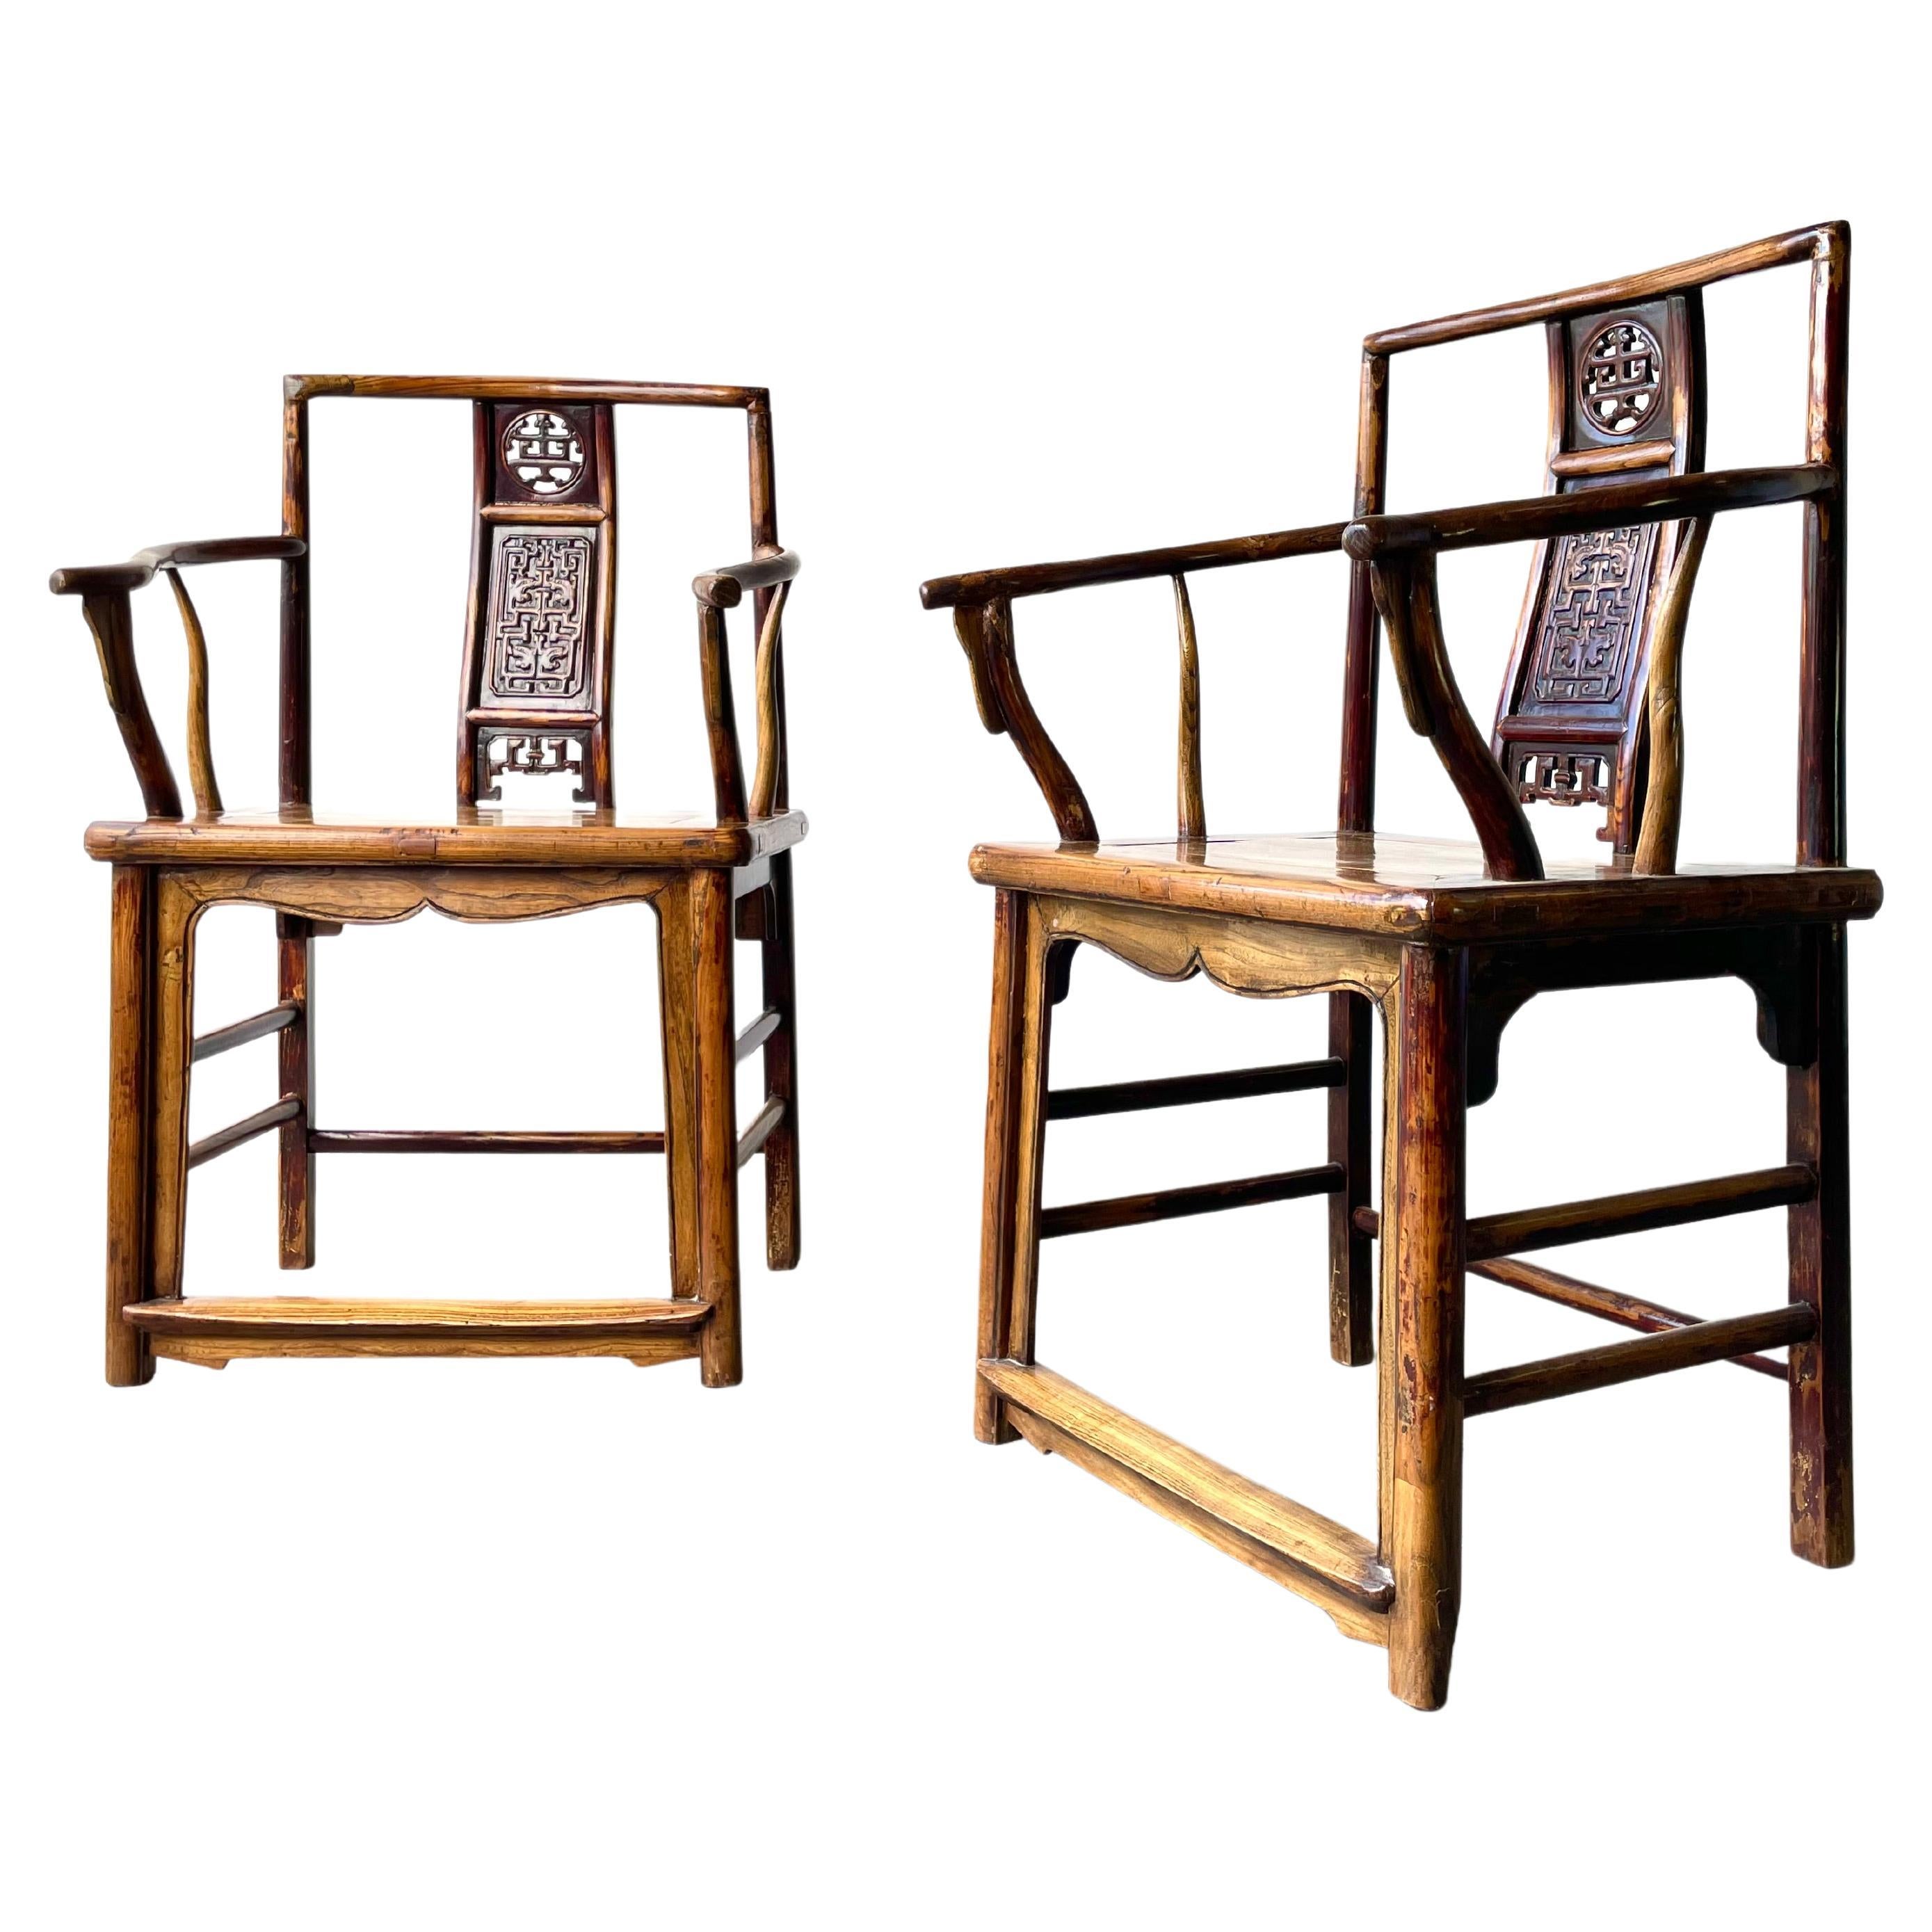 Gorgeous Pair of 19th, '1800's' Century Chinese Hardwood Arm Chairs